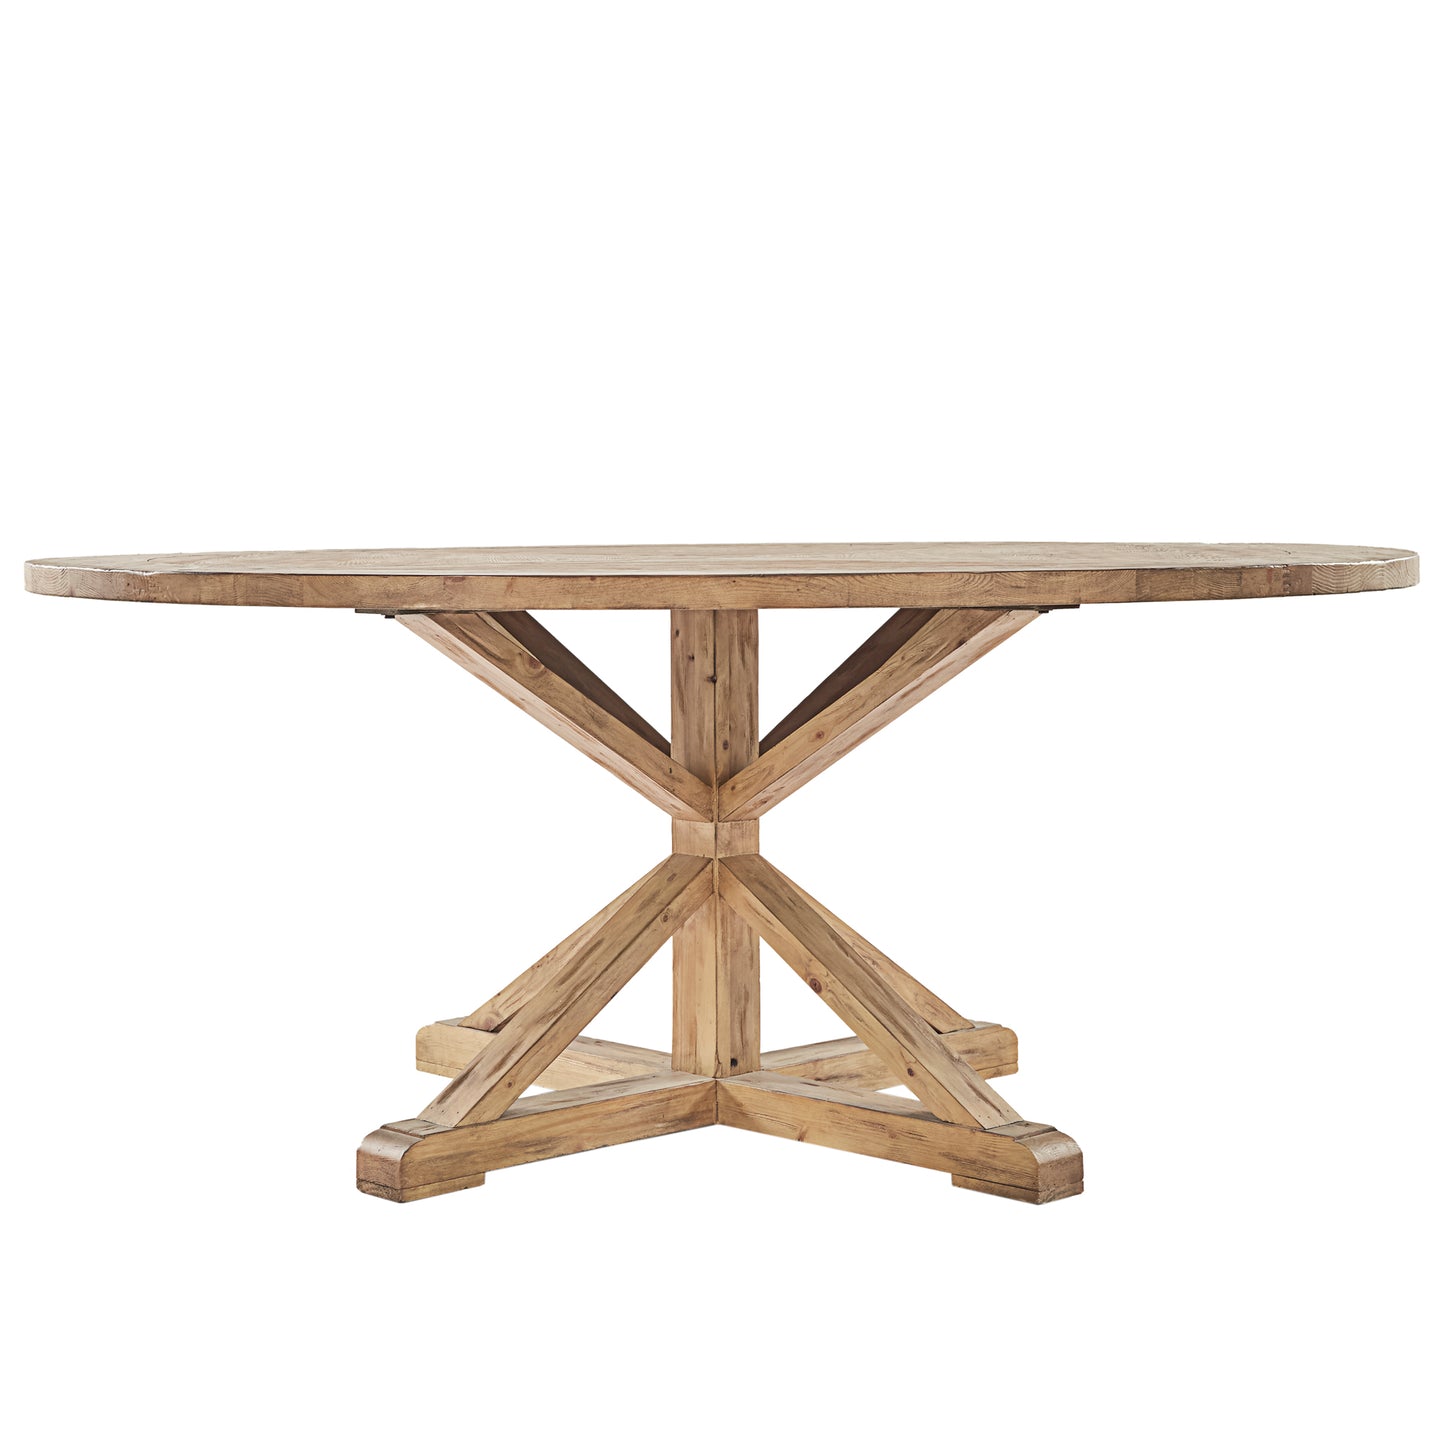 Rustic X-Base Round Pine Wood Dining Table - Pine Finish, 72-inch